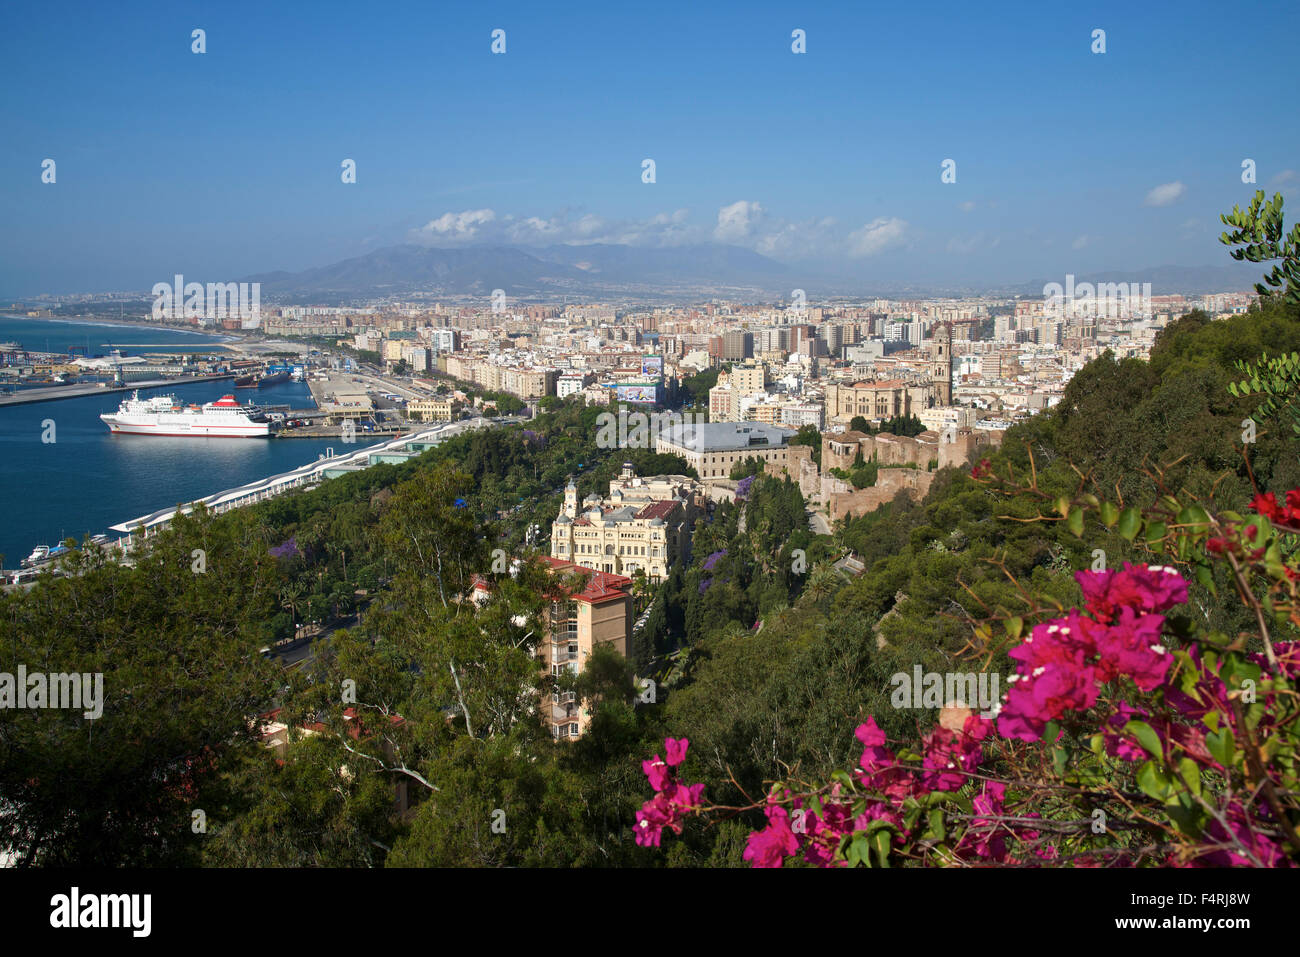 Andalusia, Spain, Europe, outside, day, town view, town, city, Malaga, Costa del Sol, übersicht, Spain Stock Photo